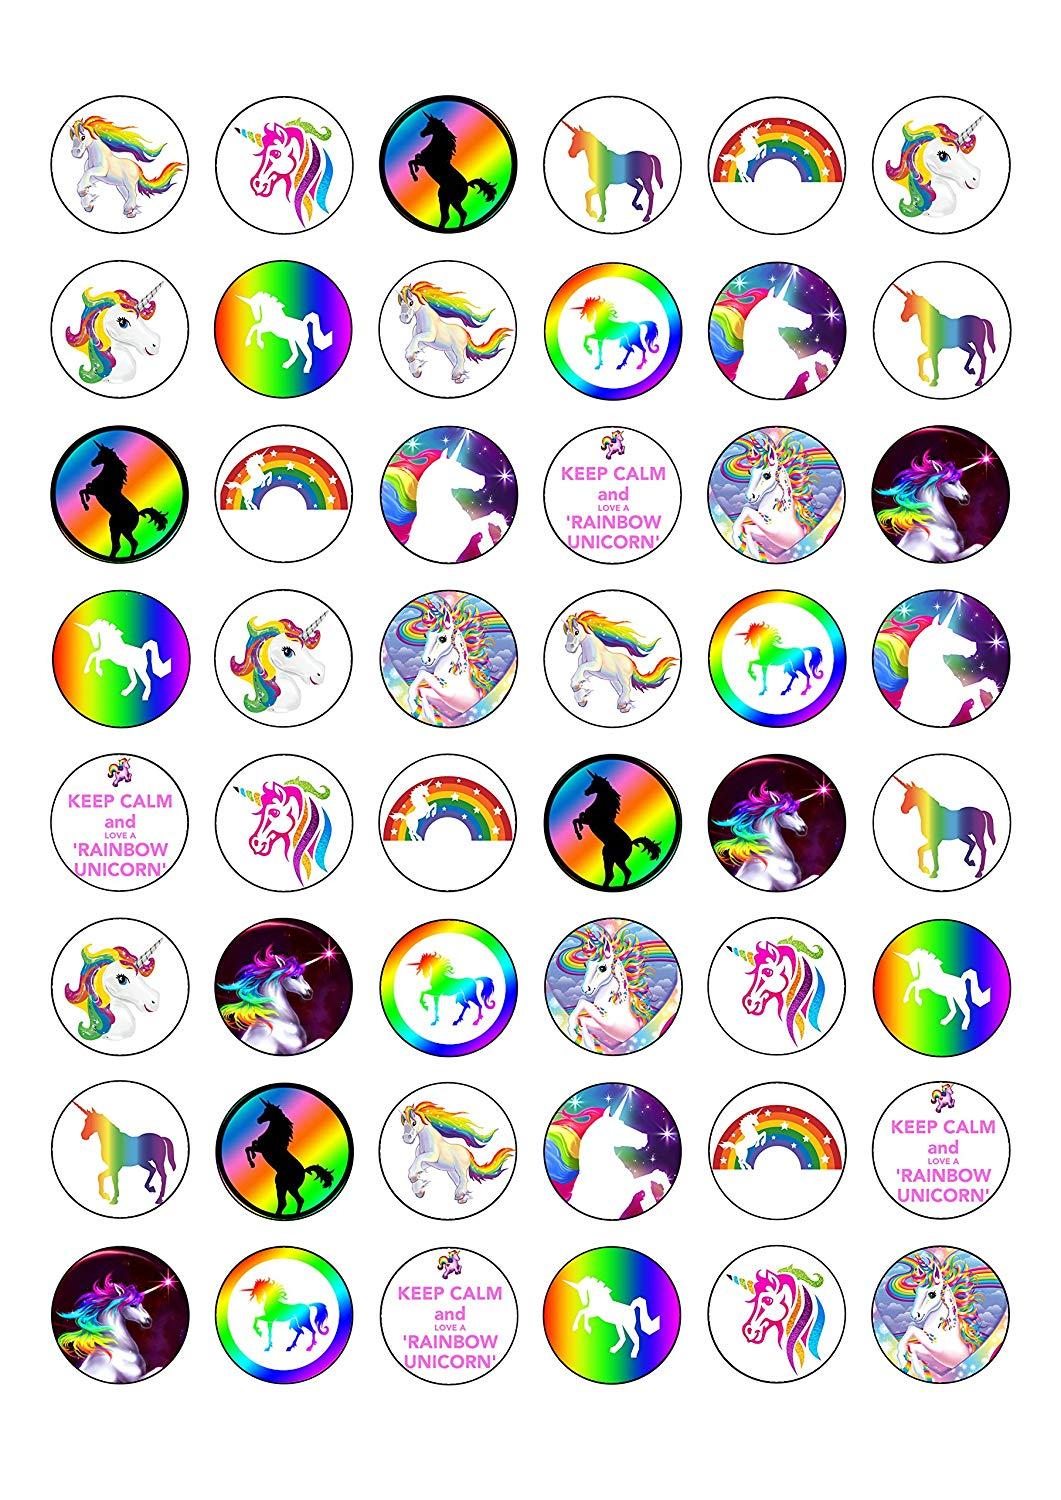 Edible Wafer Paper Rainbow Unicorn Themed Cake Toppers Decorations.5cm diameter